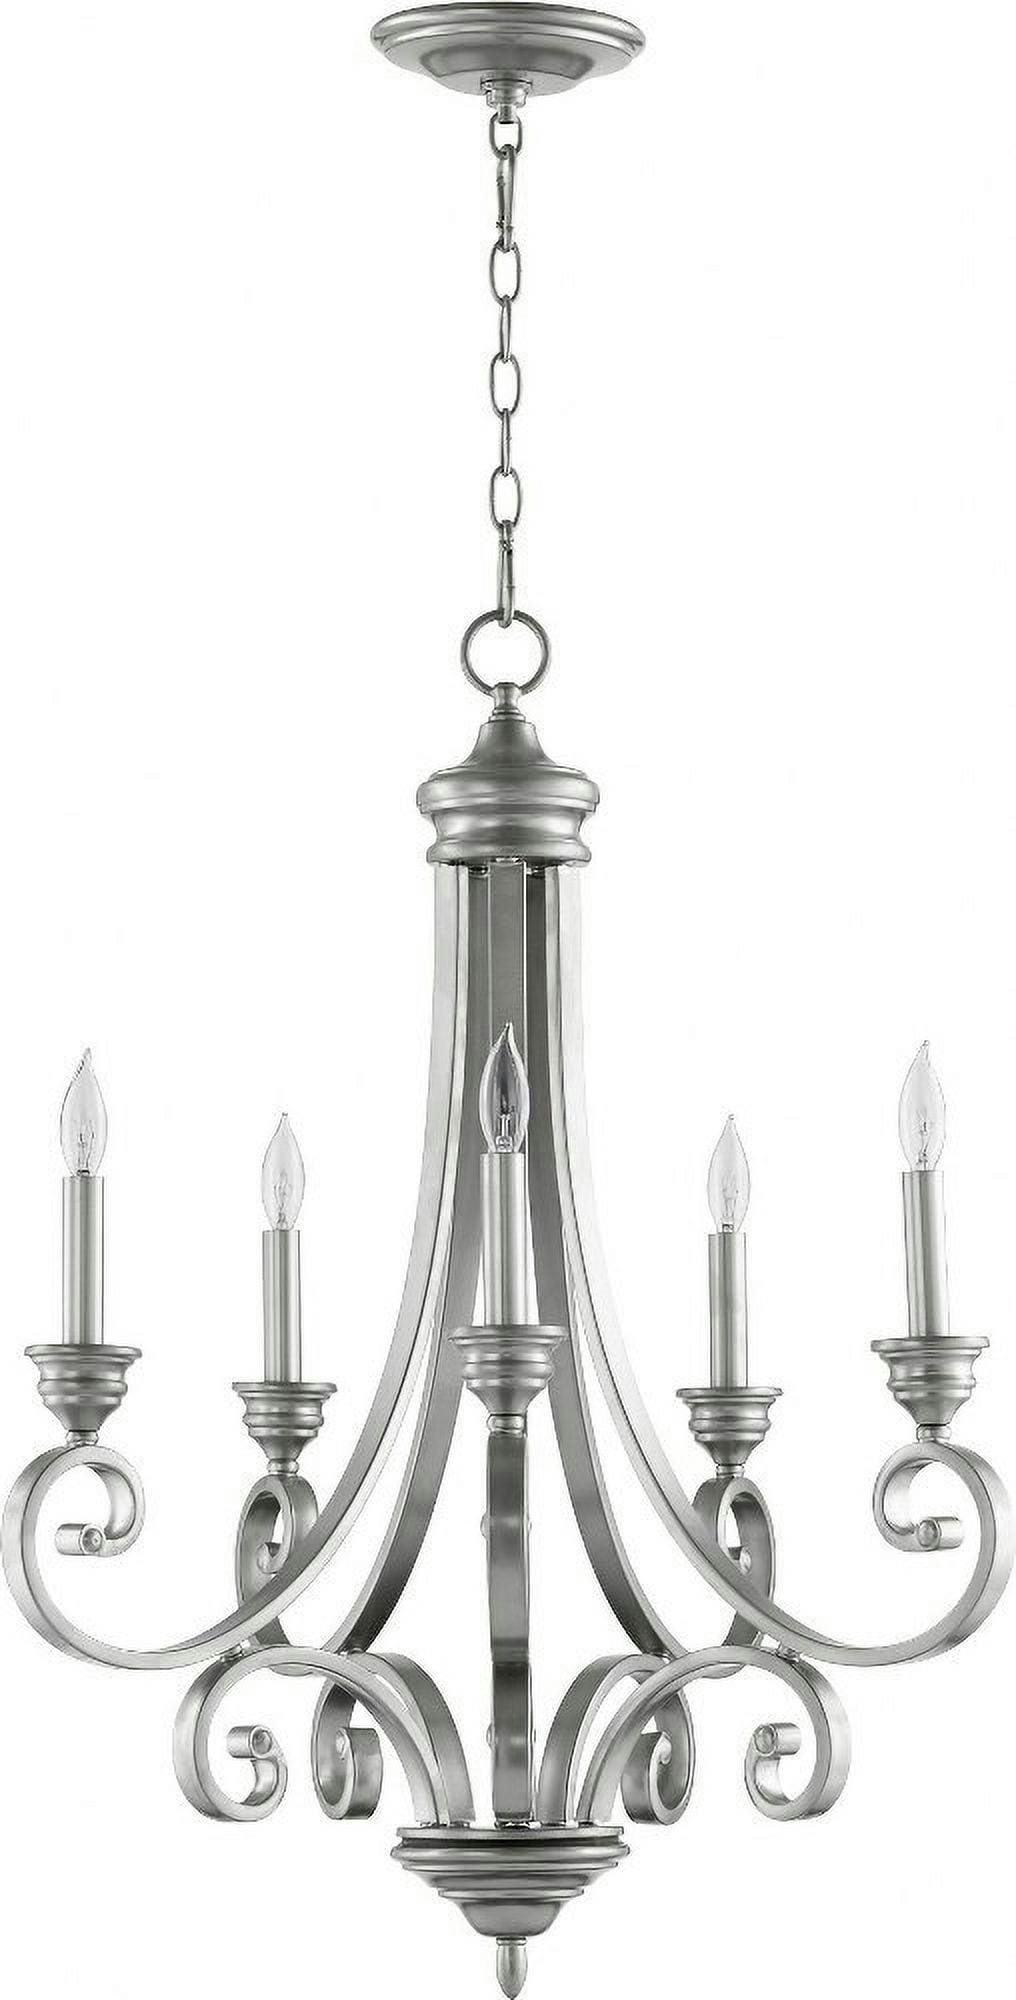 Elegant Traditional Nickel 5-Light Candle Chandelier, 25.75W x 30H